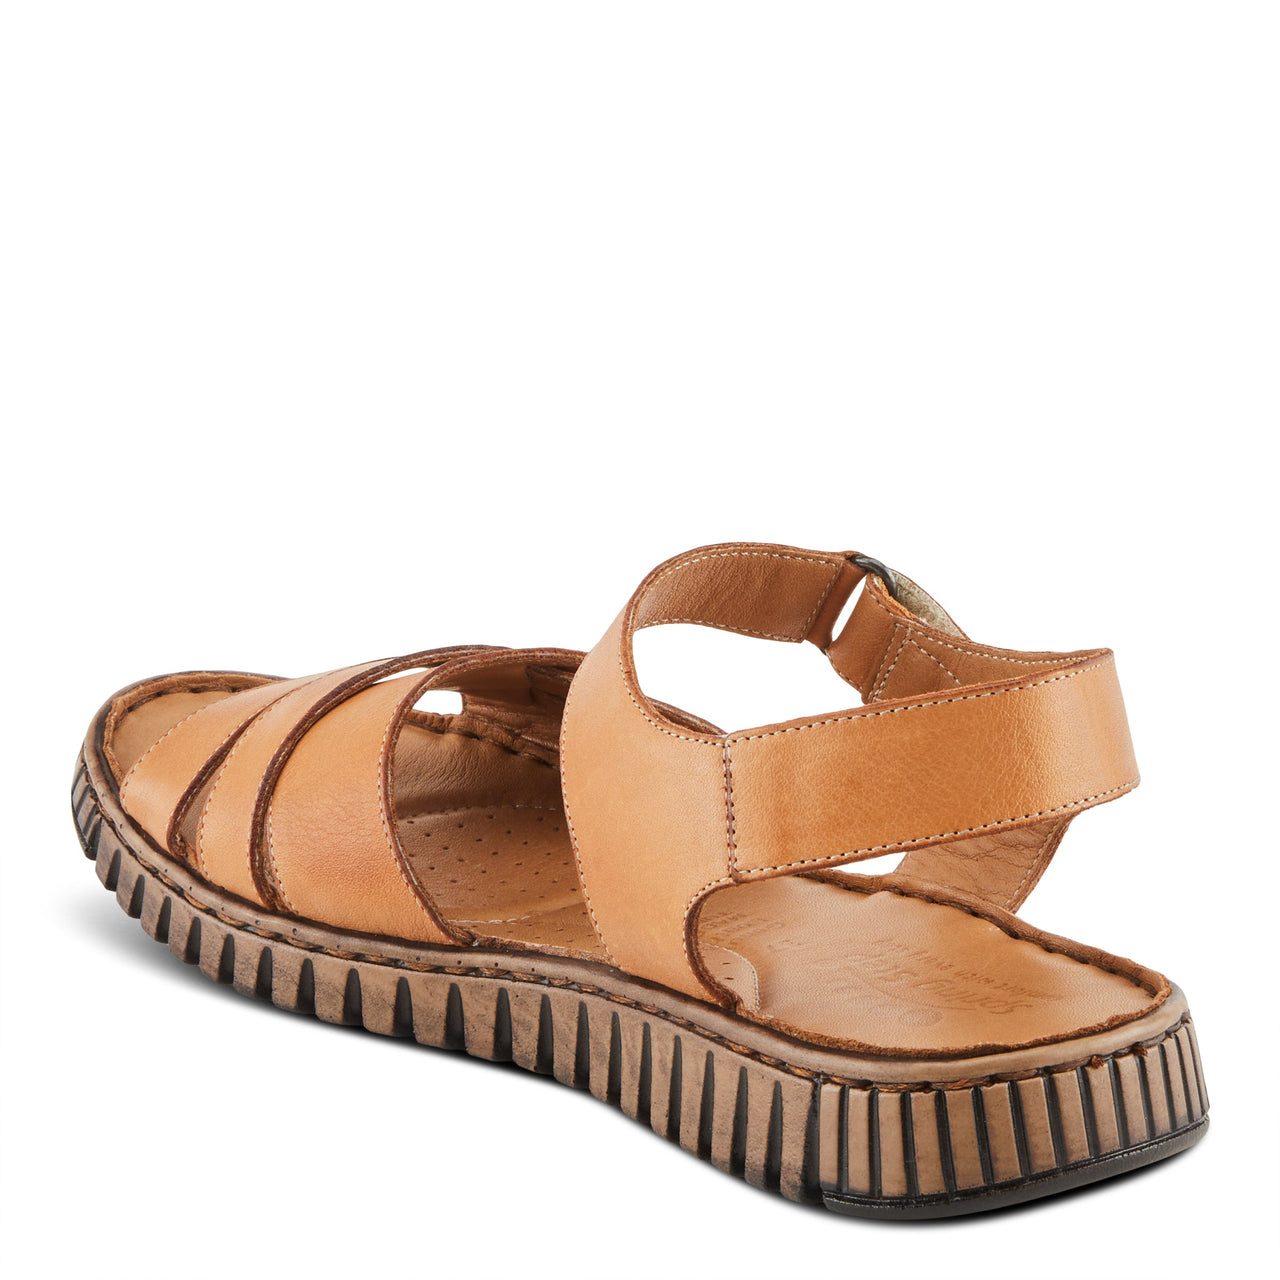 Black leather Spring Step Nochella sandals featuring a stylish strappy design and cushioned footbed for all-day comfort and support